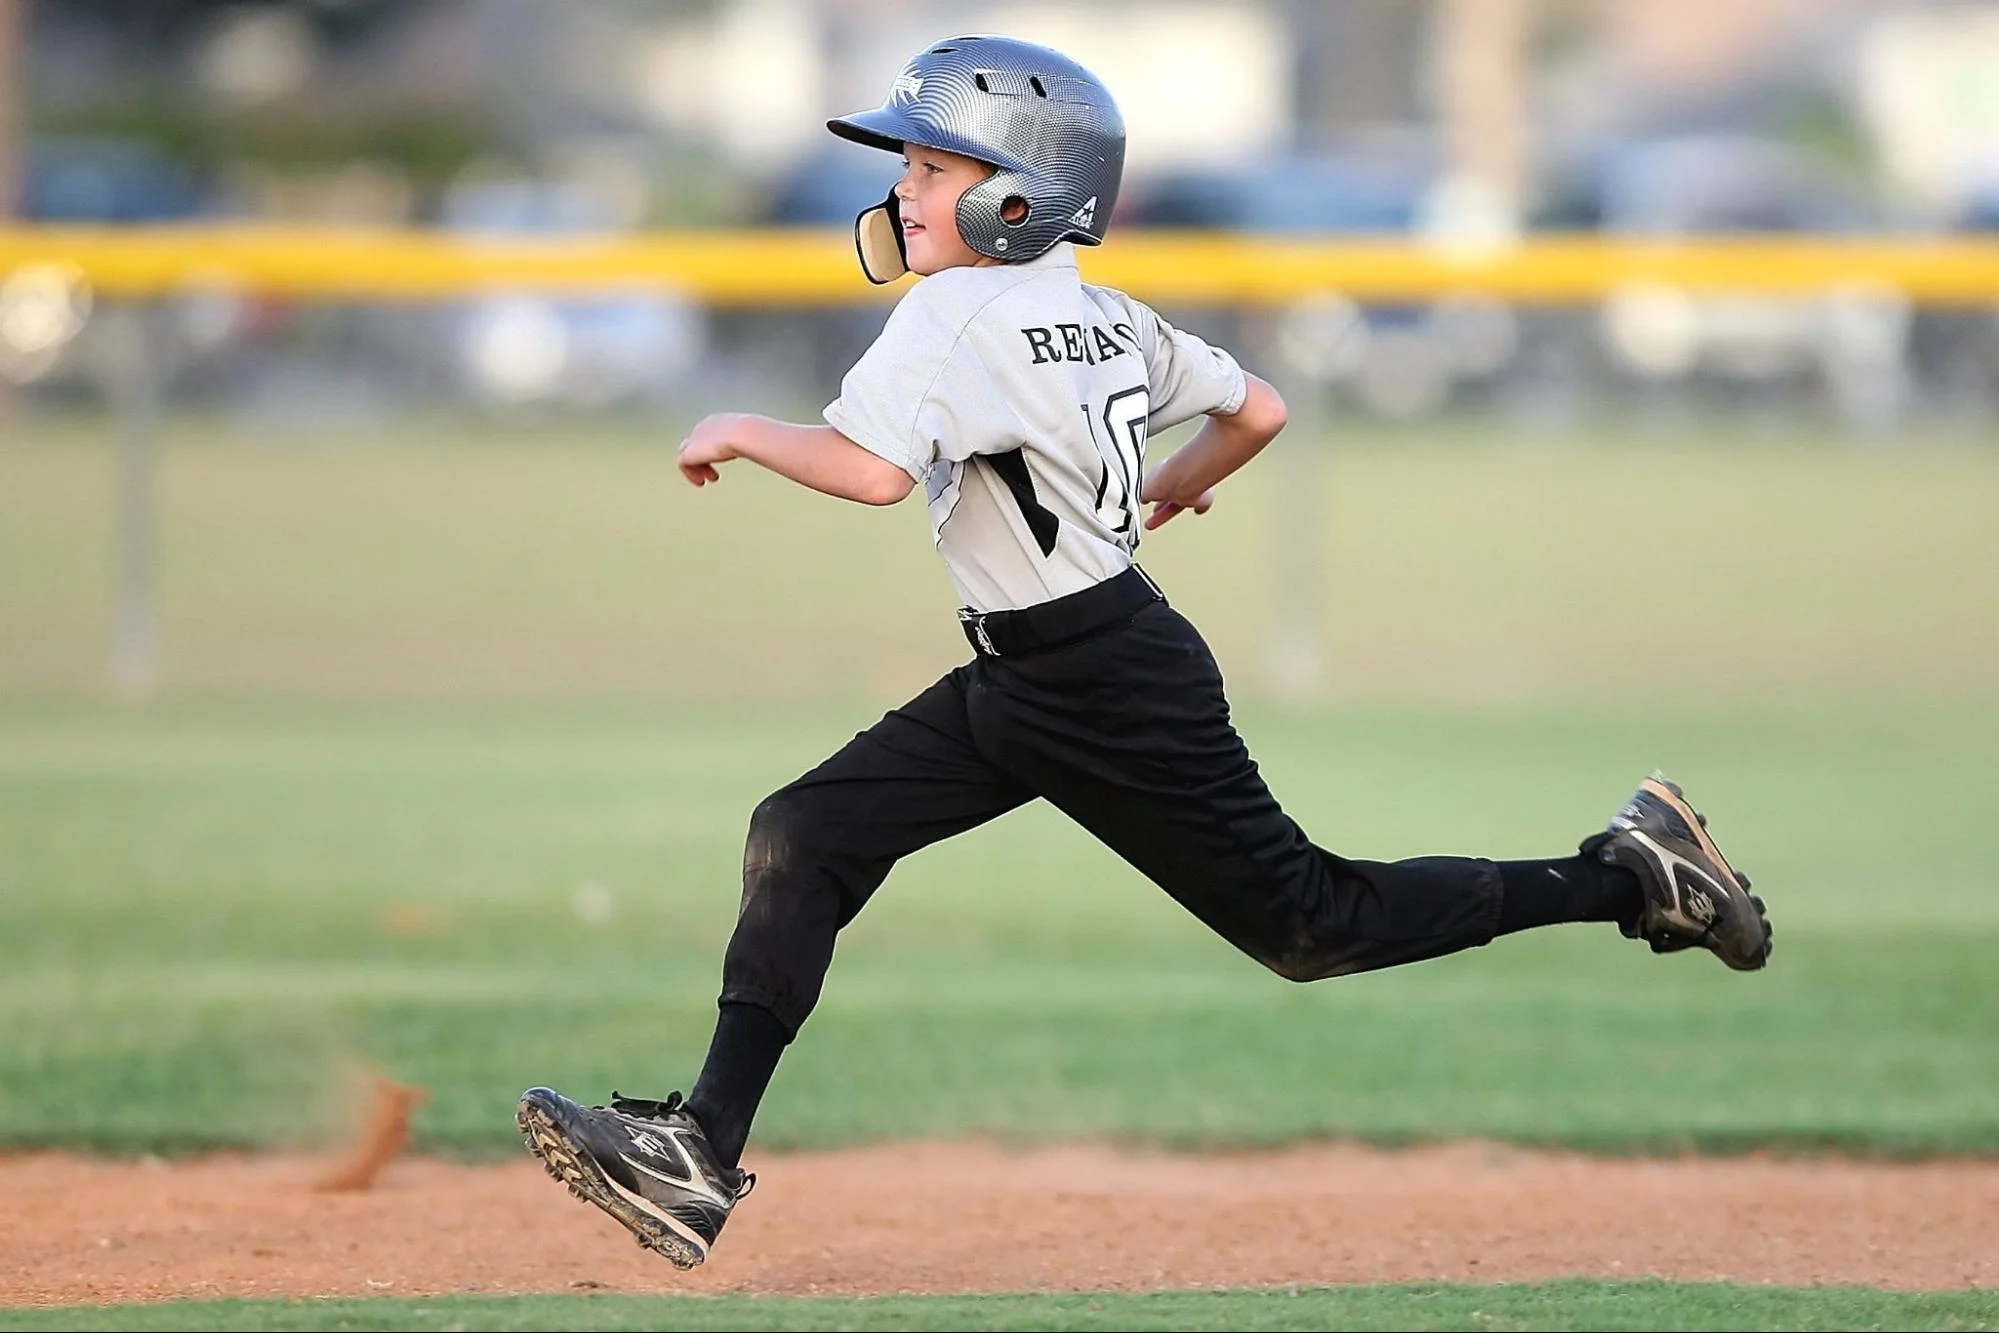 a youth baseball player running the bases